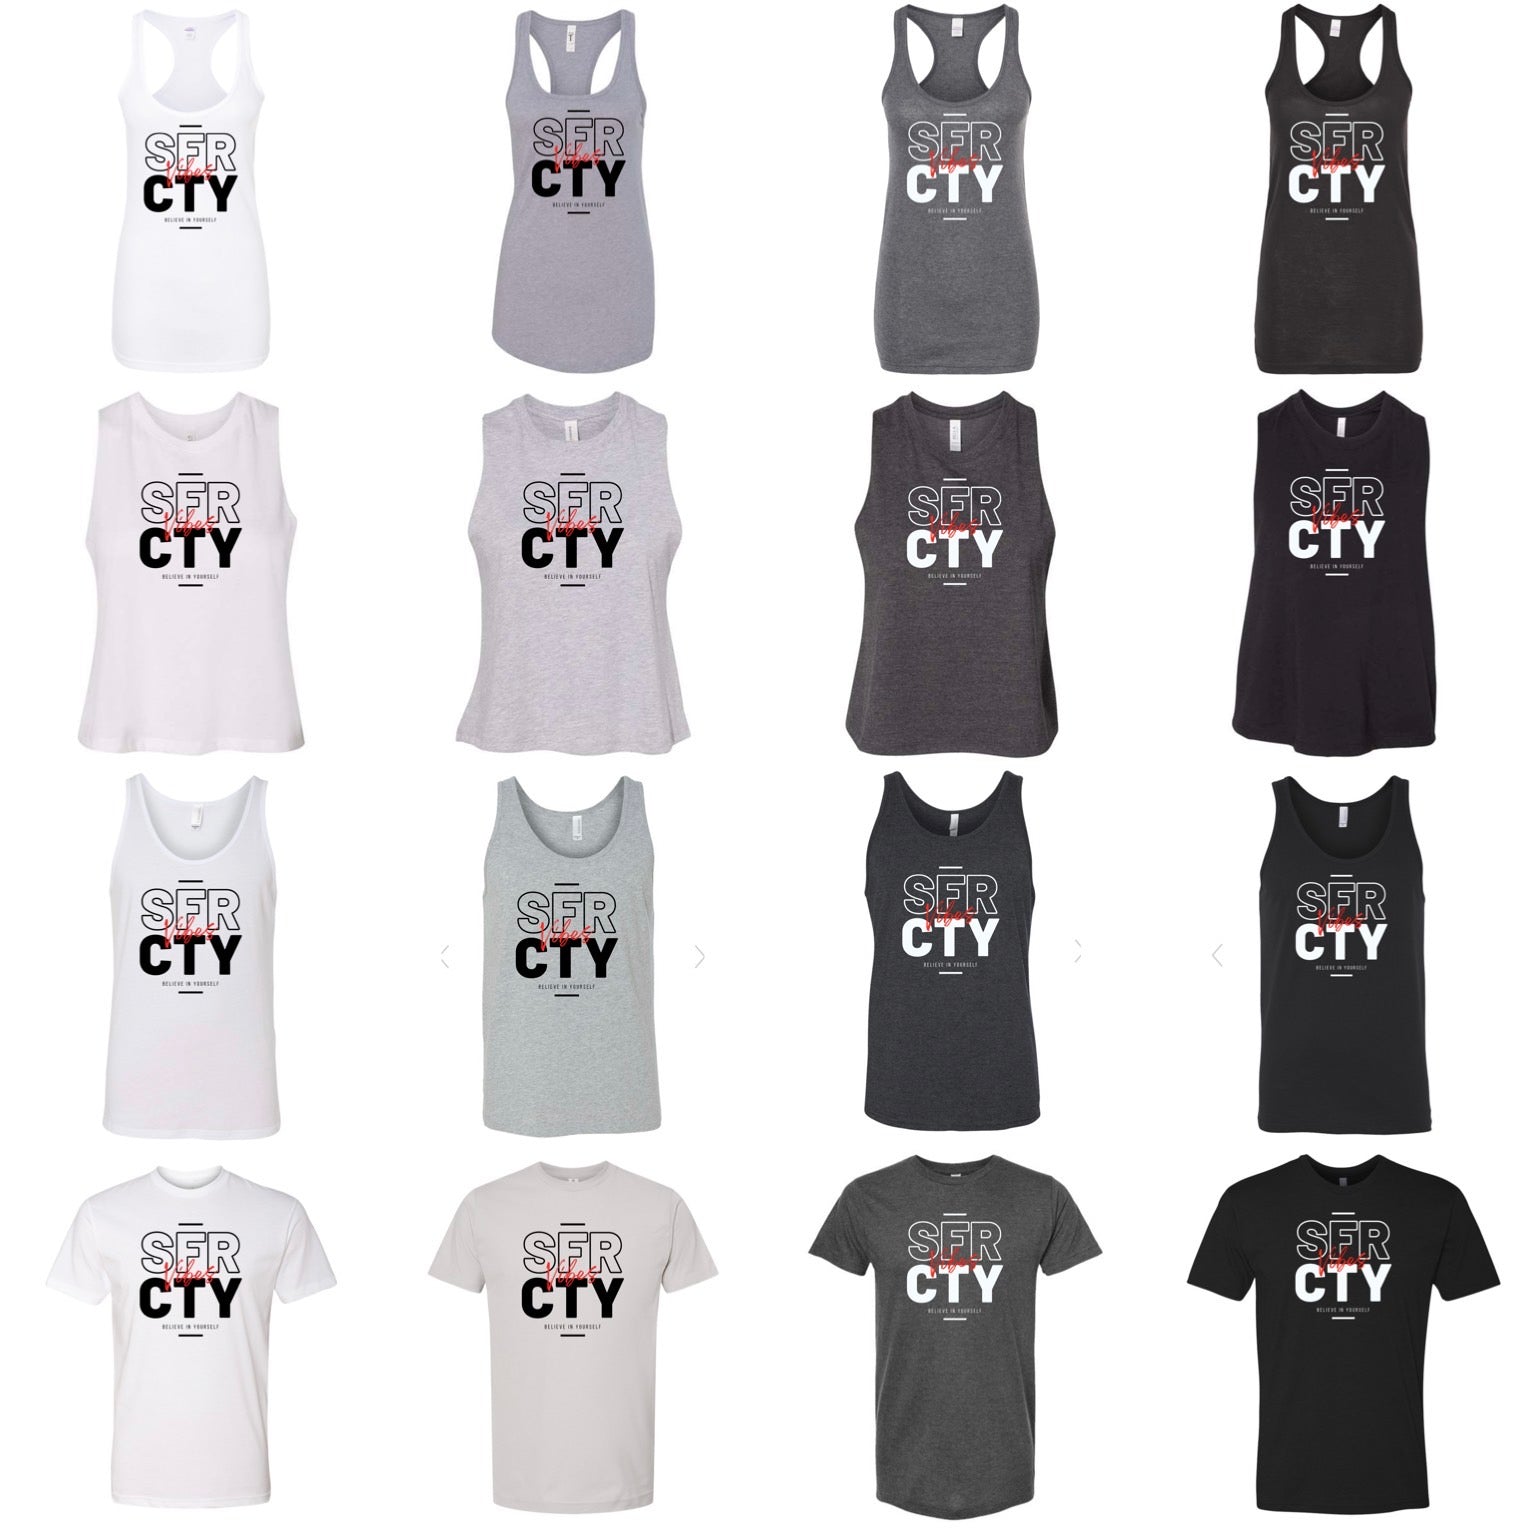 Suffer City Vibes “Cooler" Options